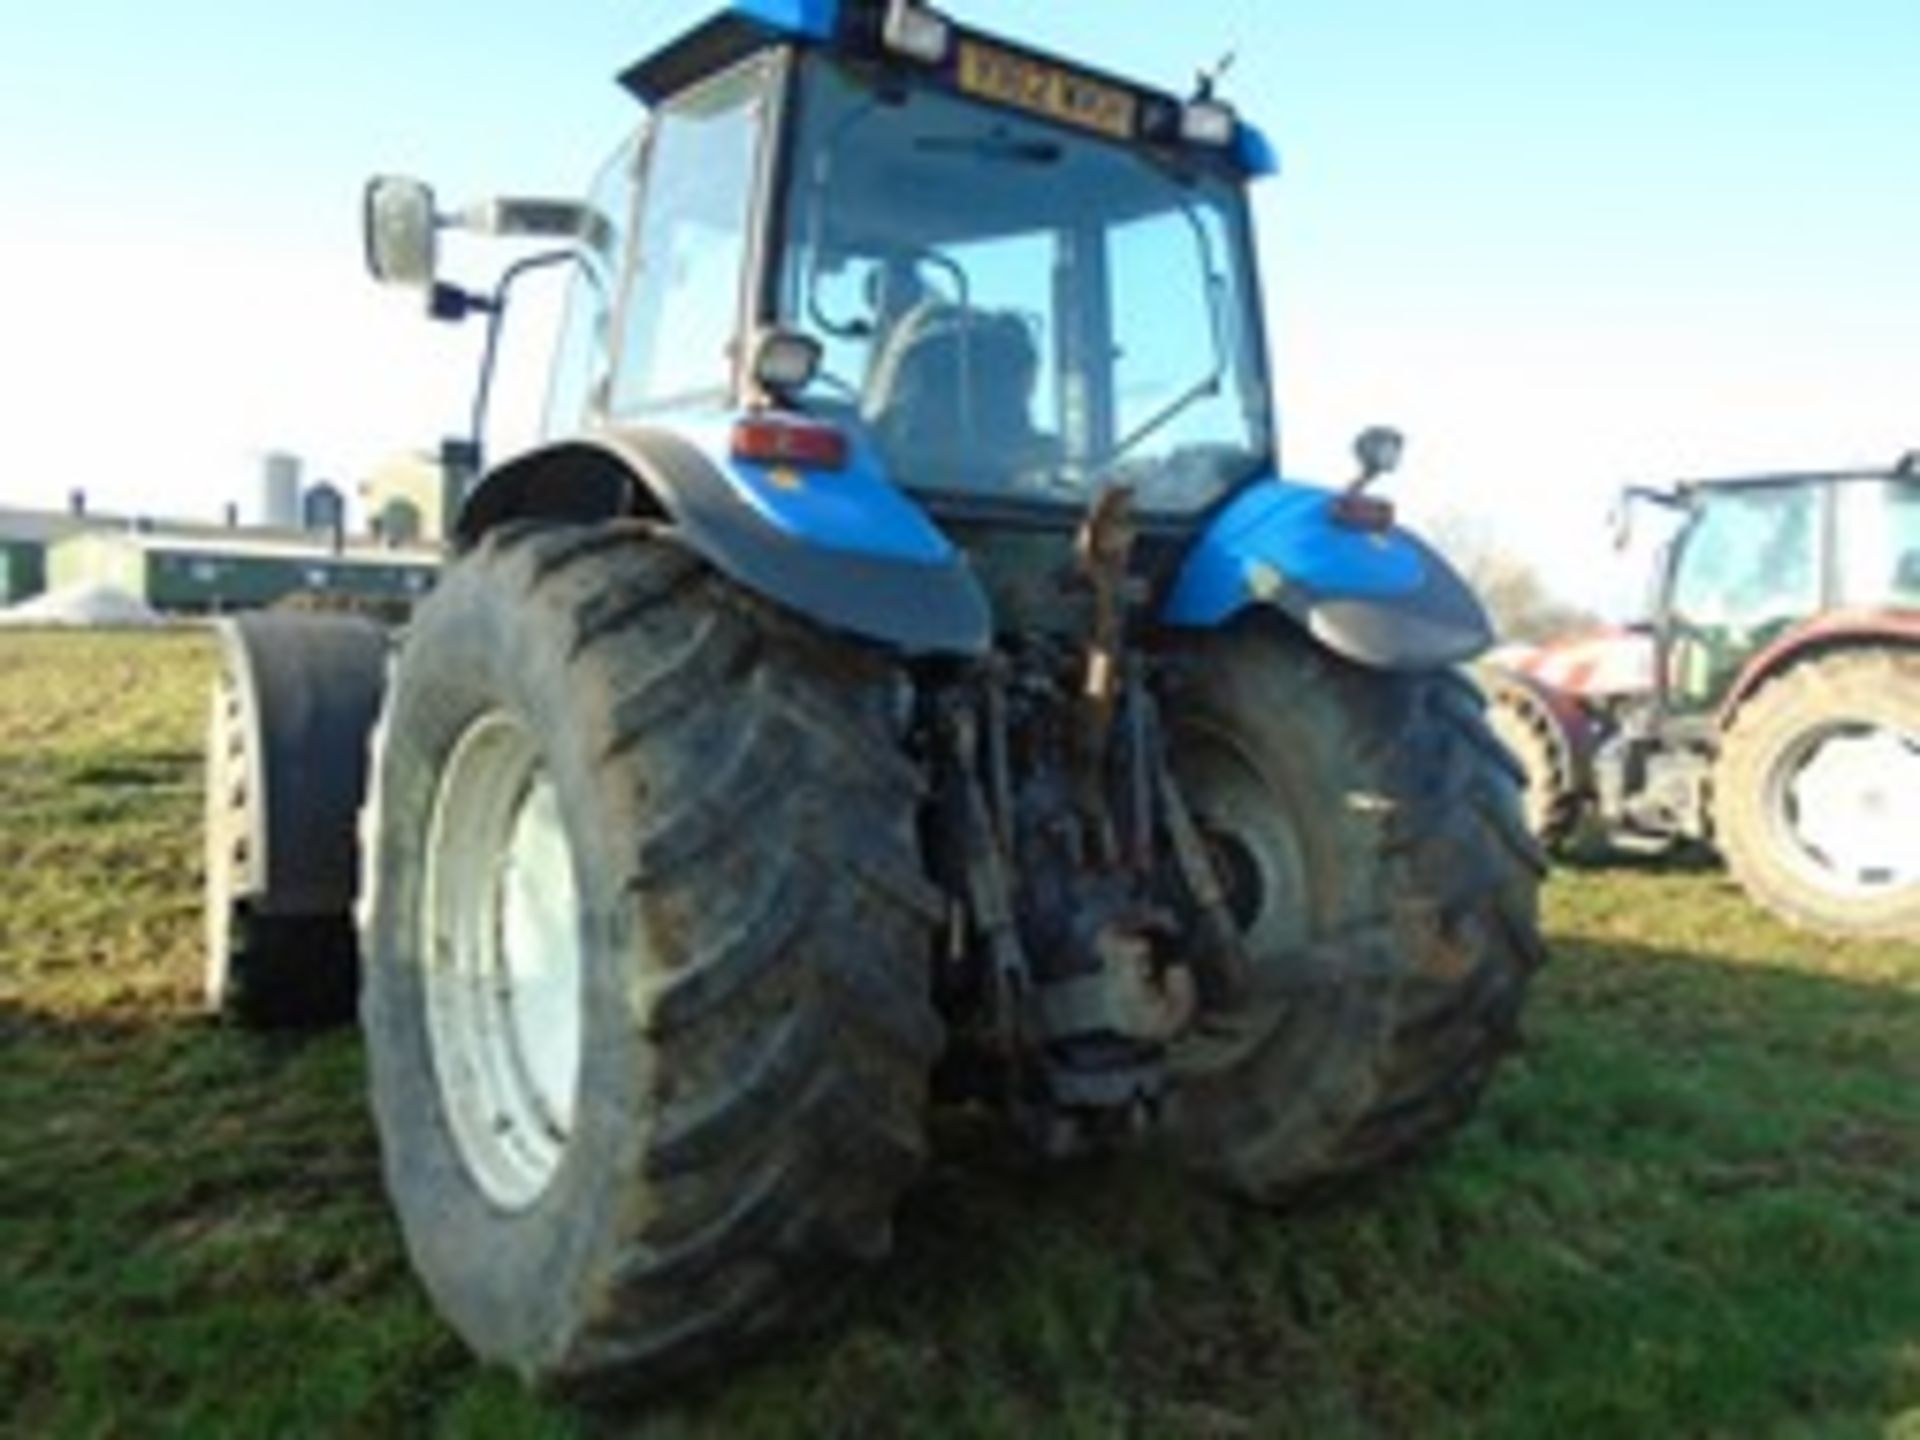 New Holland TM150 Y182 WKH 10,247hrs, 40km/h, Range Command transmission, air conditioning, CD - Image 3 of 3